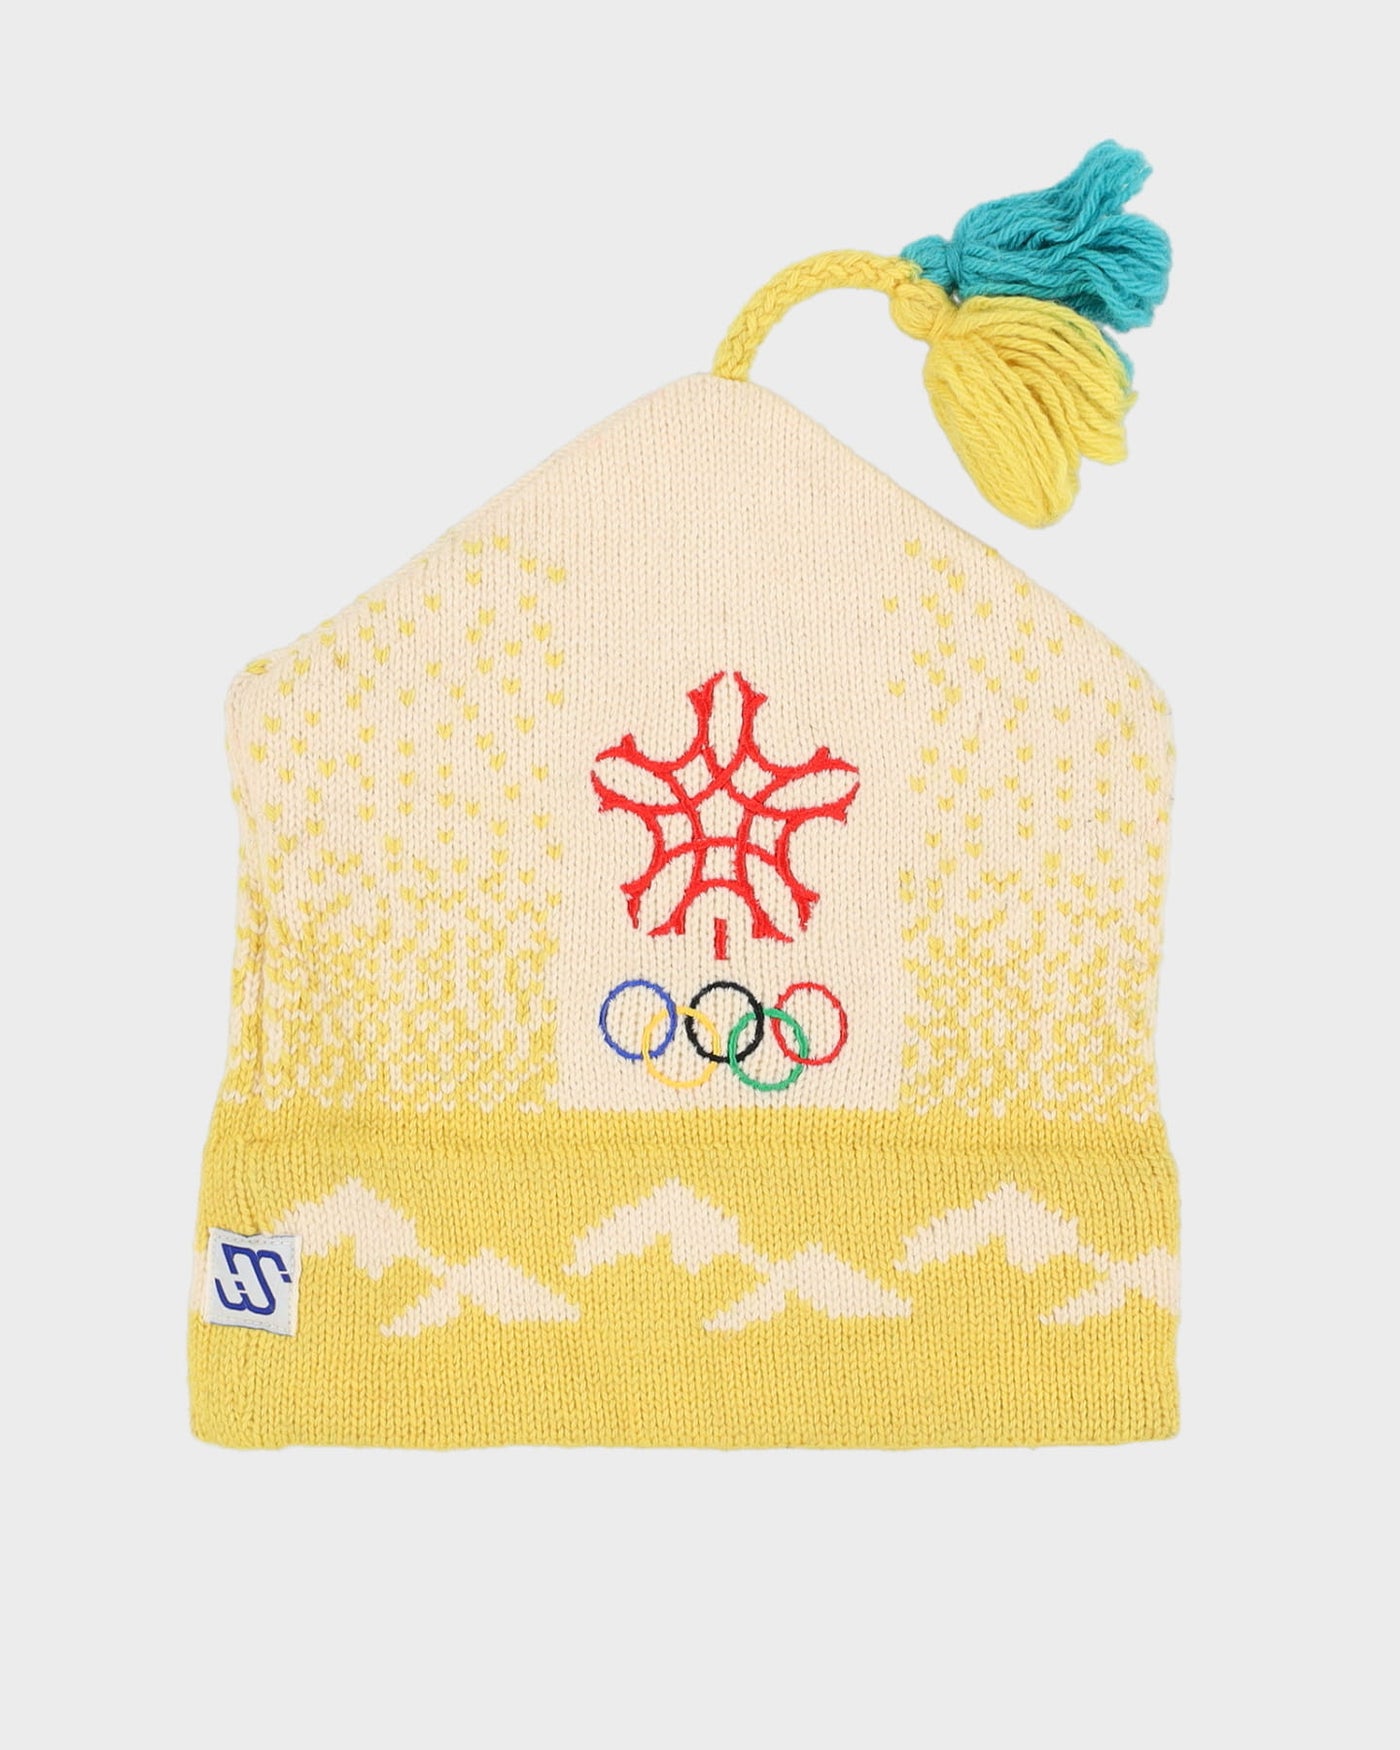 Vintage 1988 Olympics Yellow / Cream Patterned Beanie